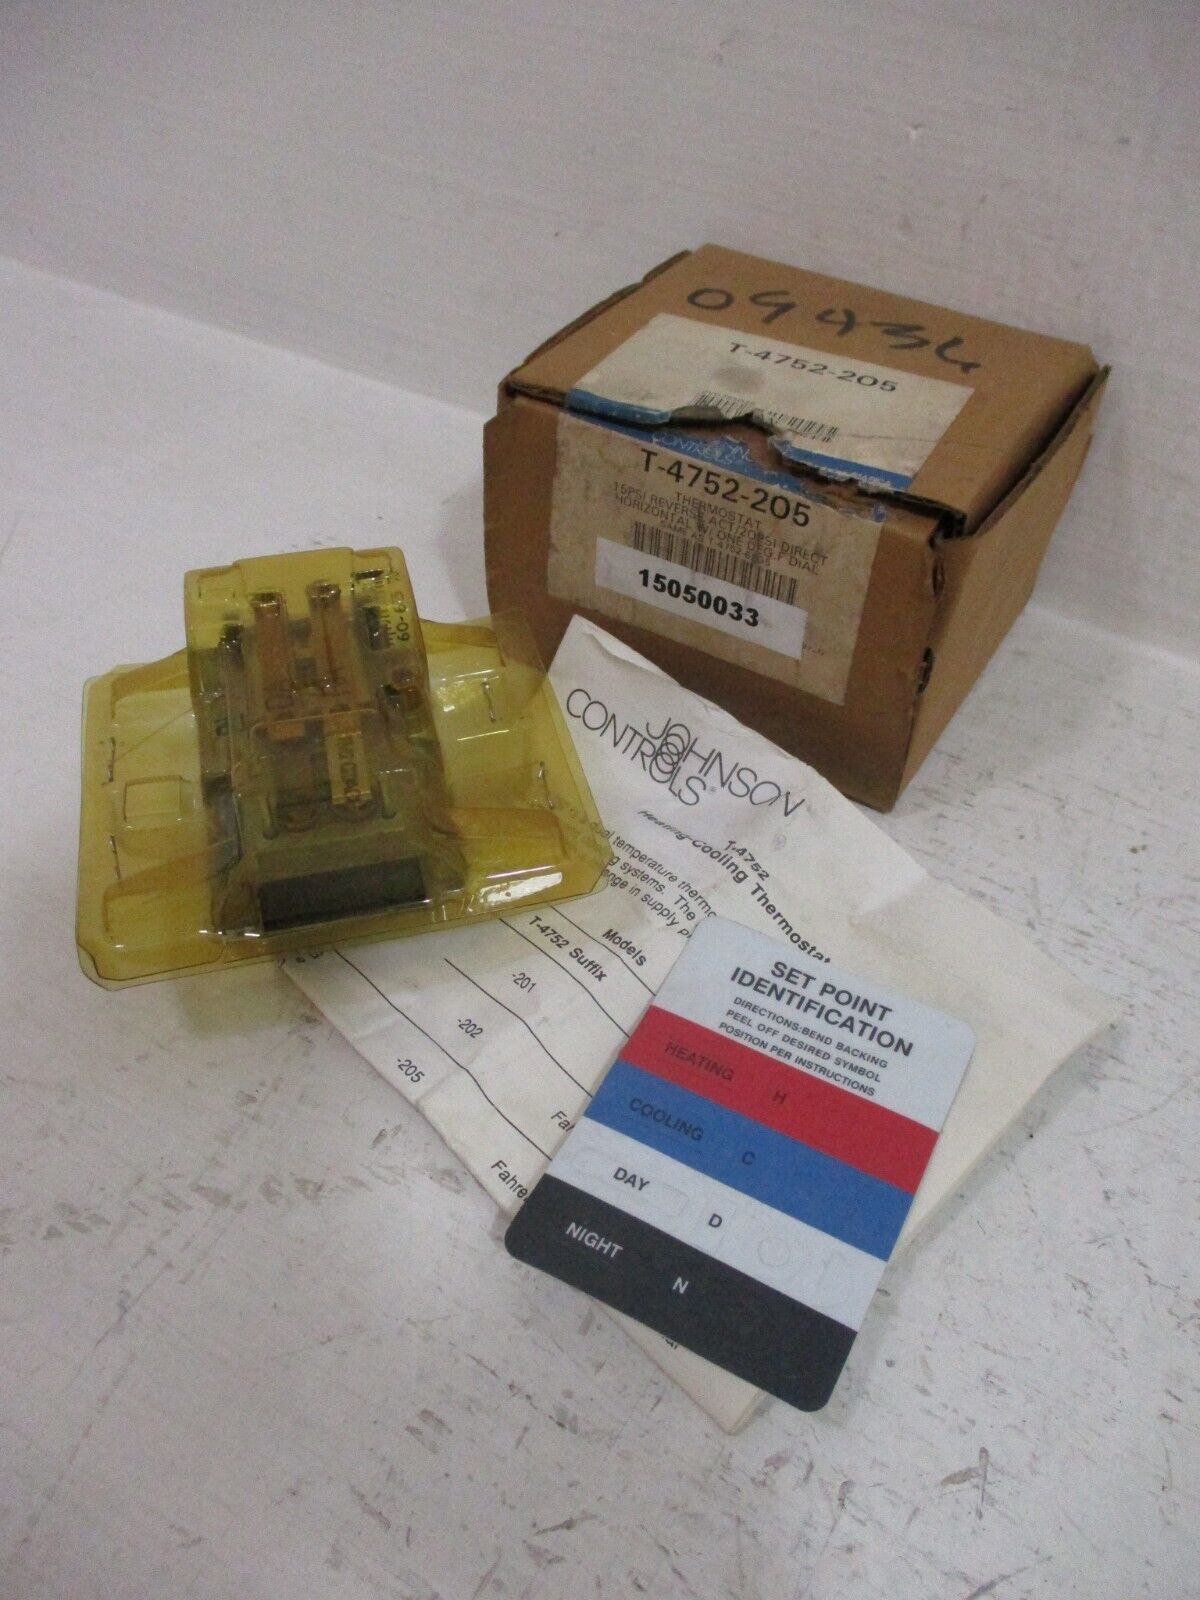 NEW Johnson Controls T-4752-205 Heating Cooling Thermostat T-4752-6205